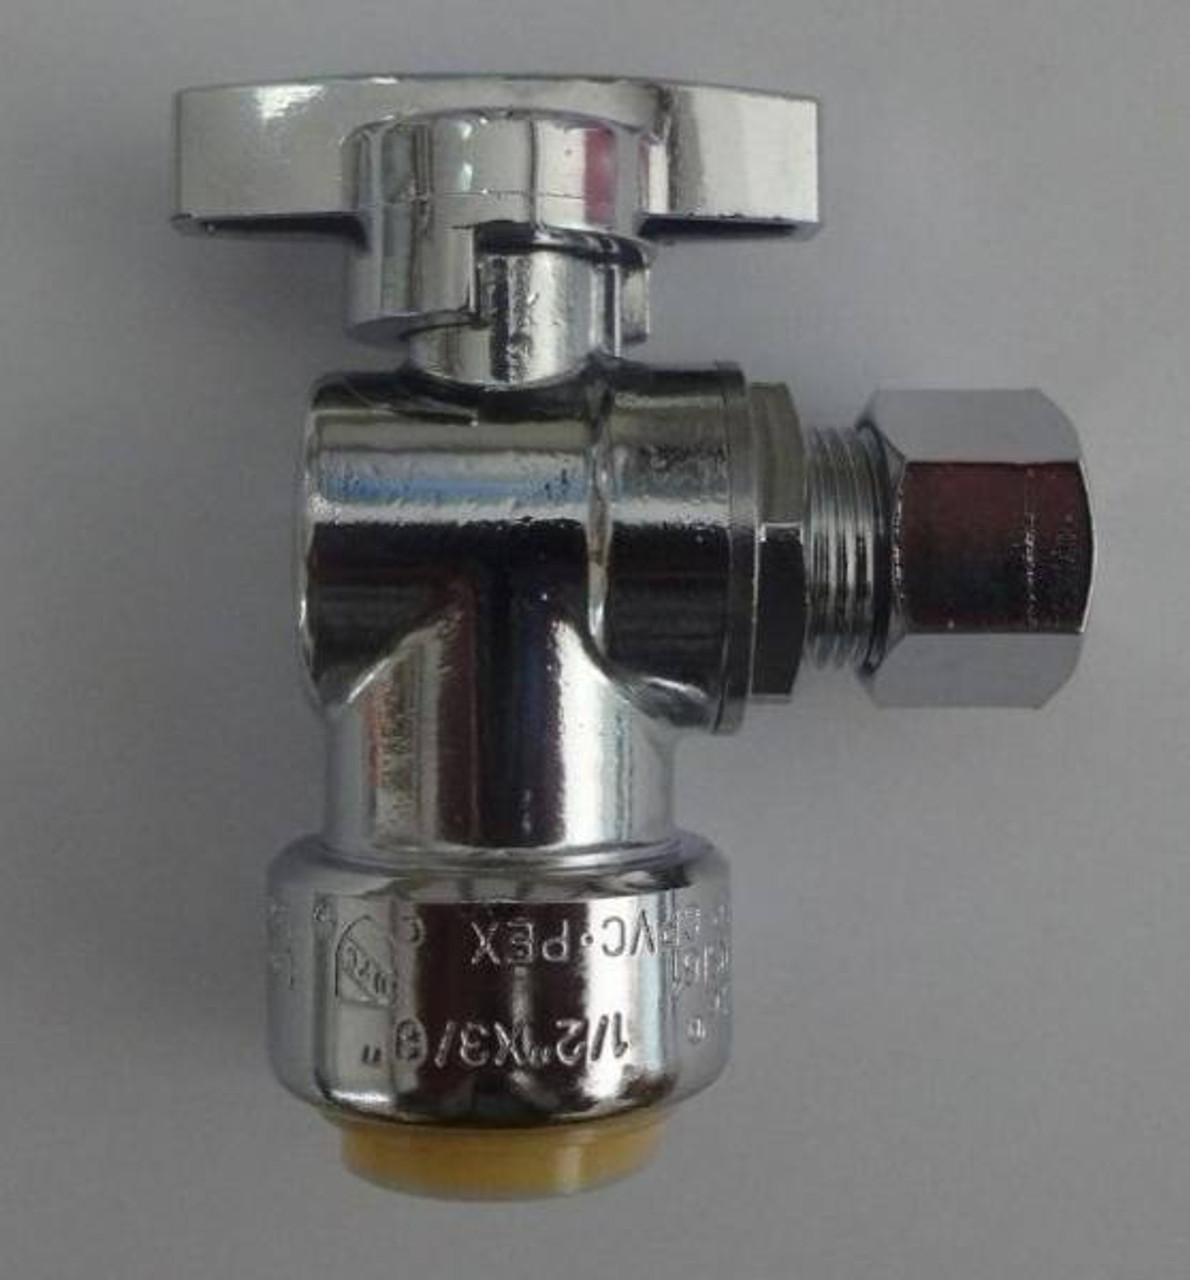 Probite Lf953a 1 2 X 3 8 Od Chrome Plated 1 4 Turn Push Connect Angle Stop Valve